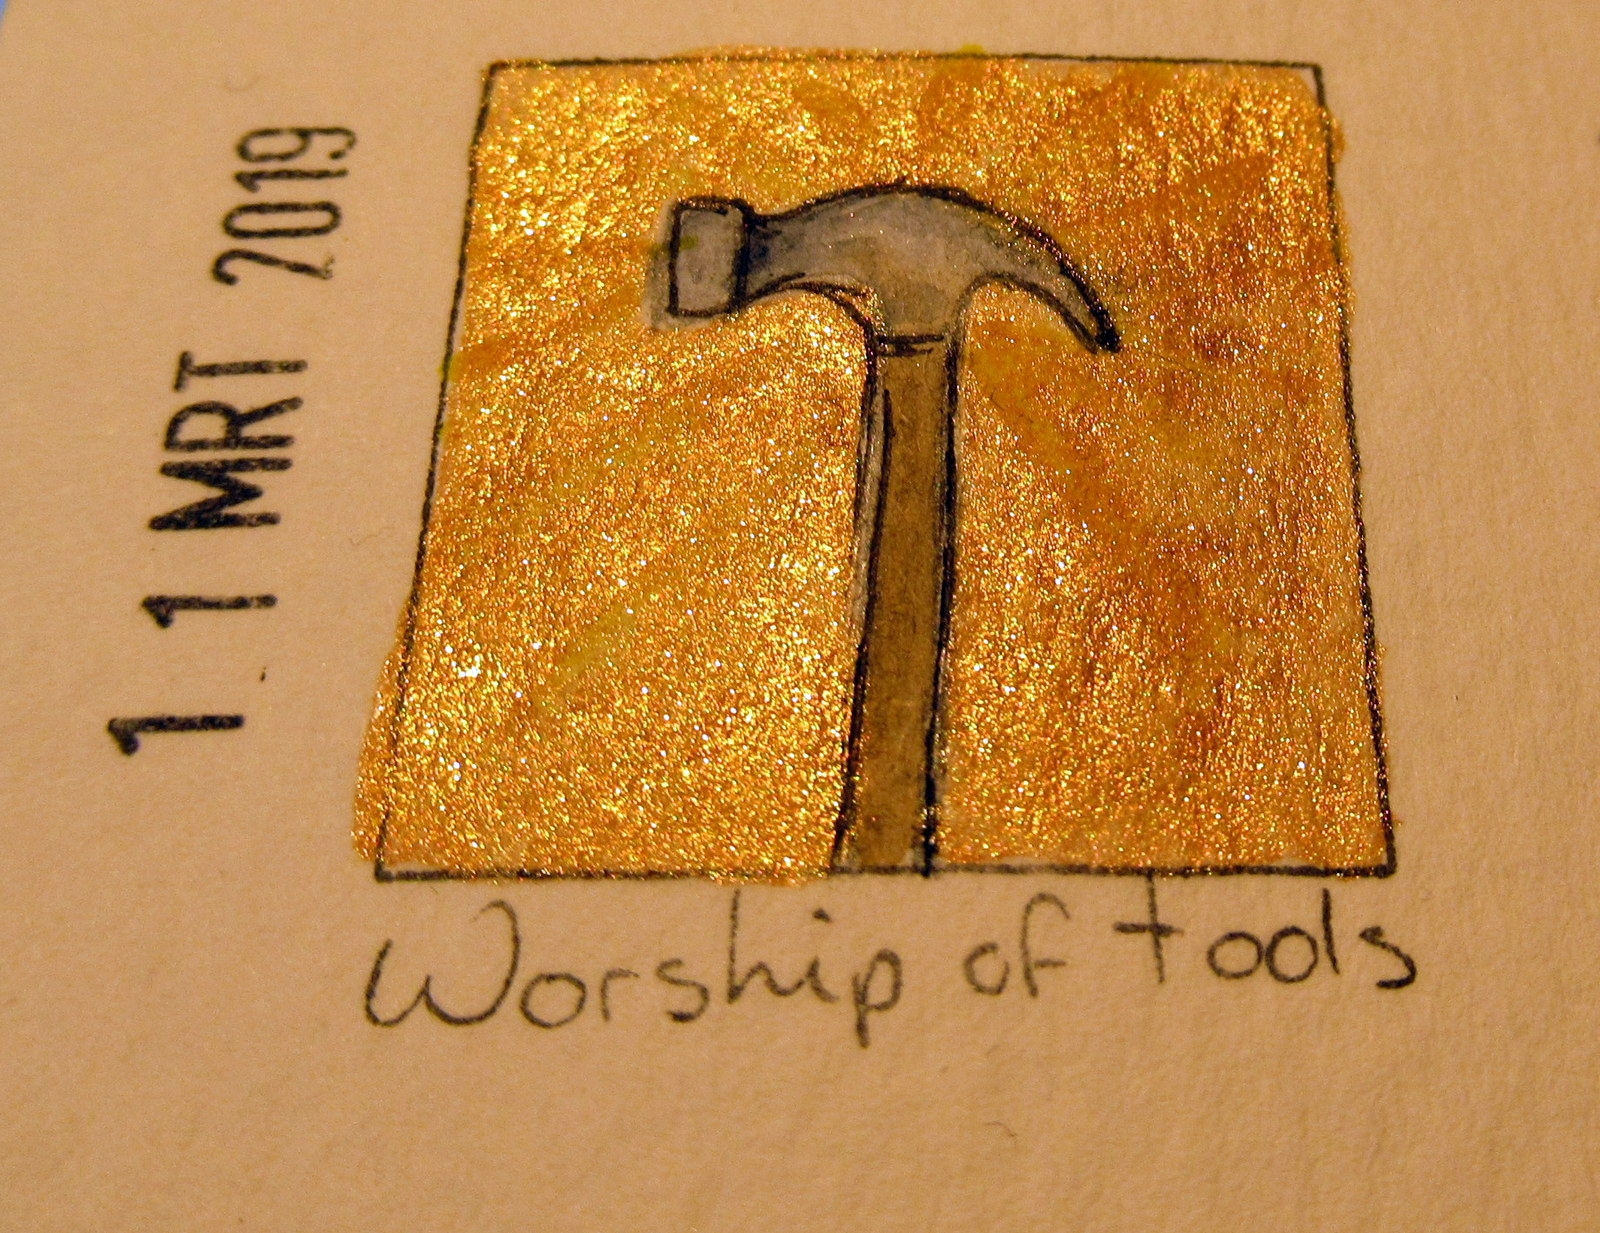 Every Inchie Monday Inchie Worship Of Tools Day